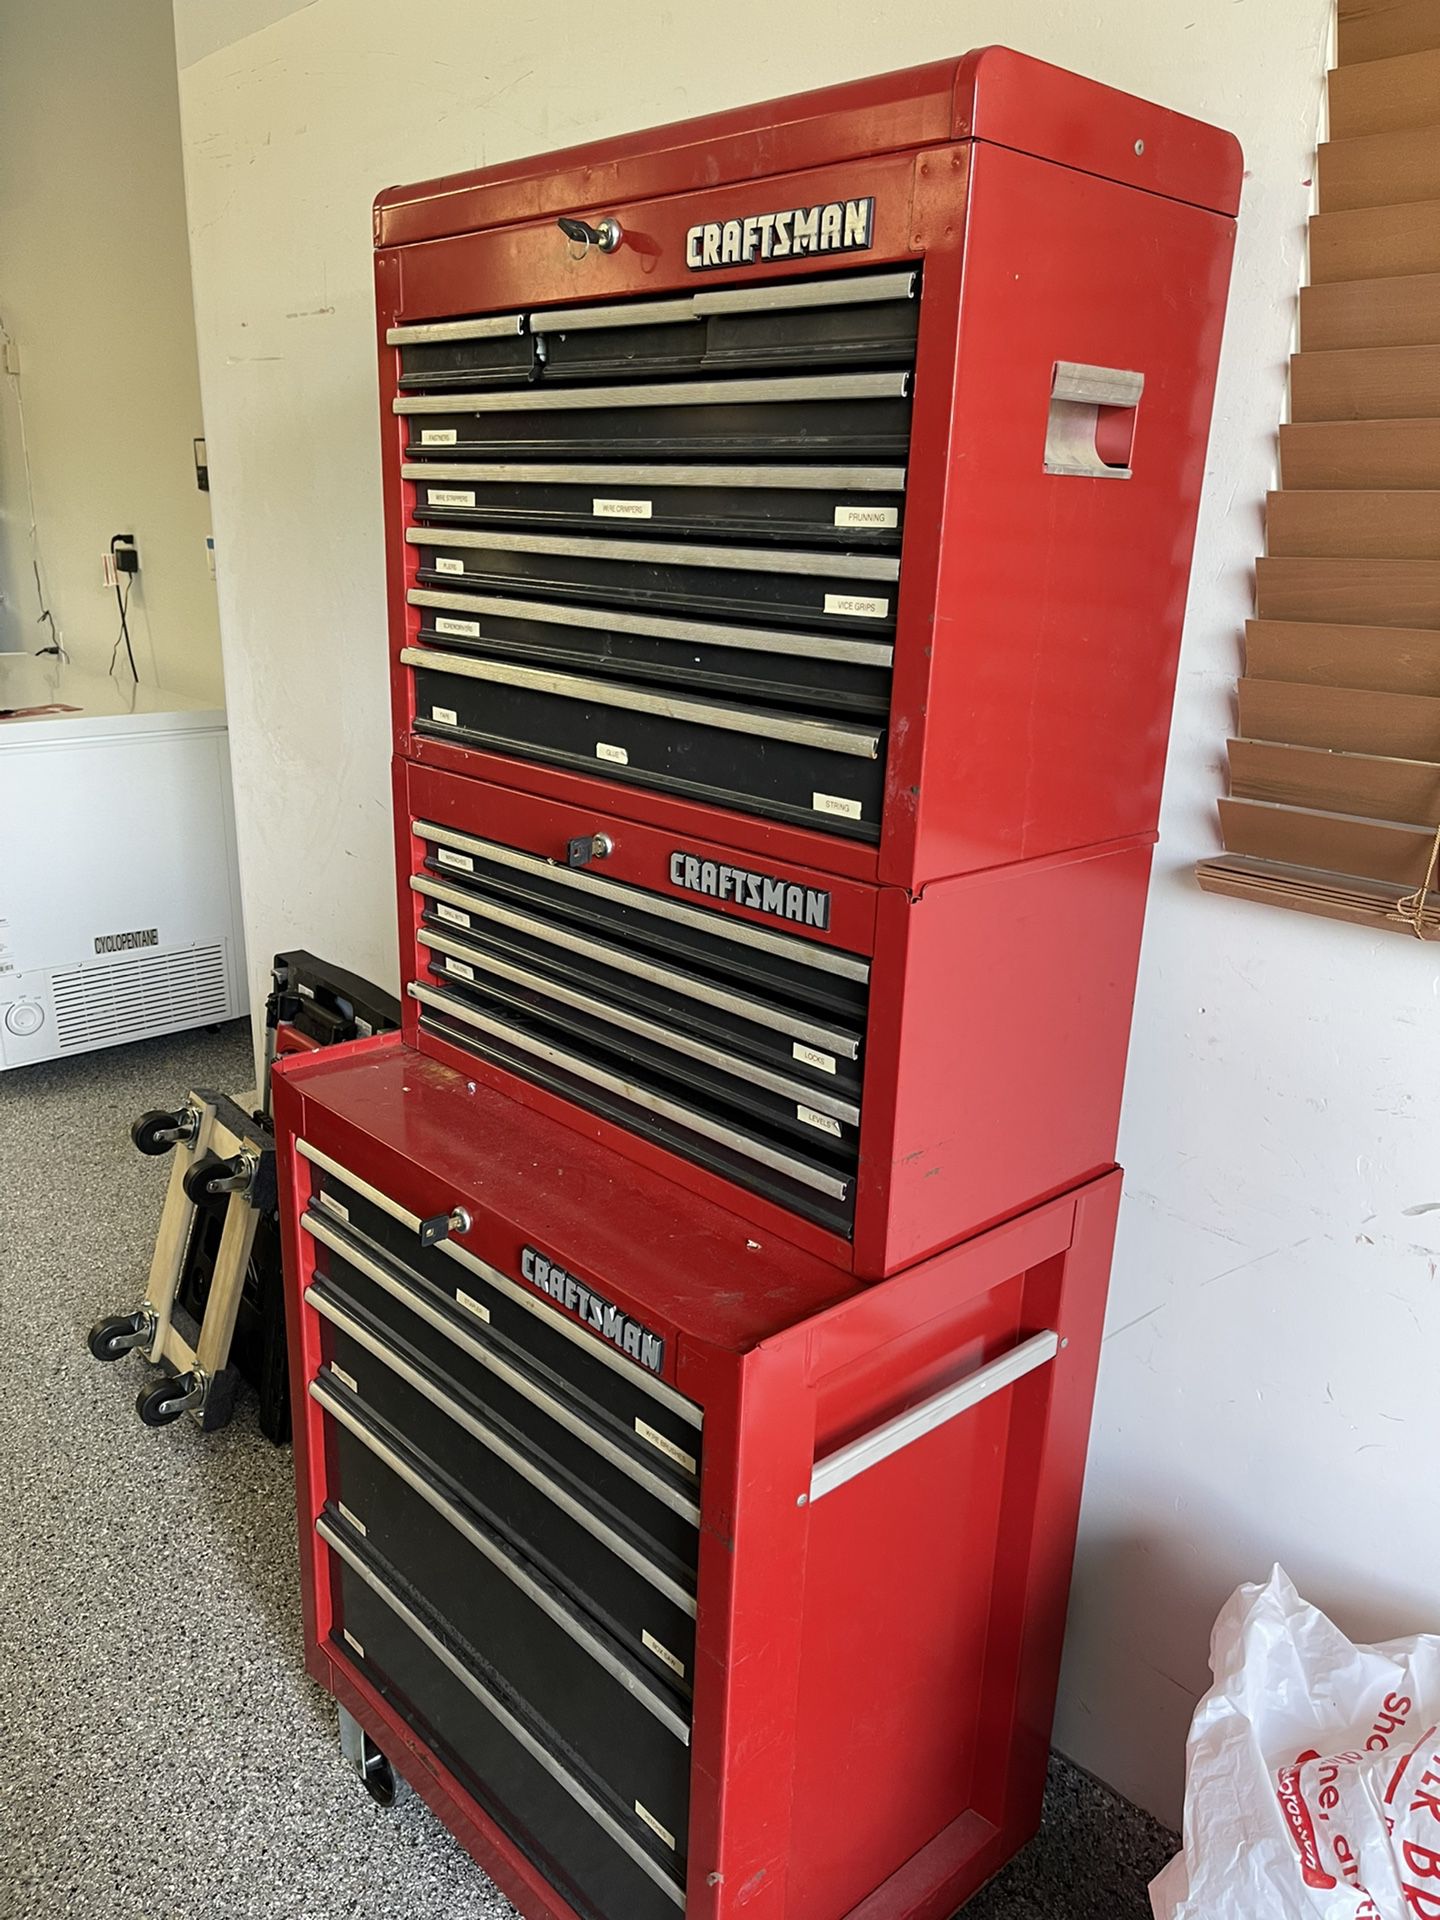 Craftsman Three Tier Tool Box for Sale in Poway, CA - OfferUp